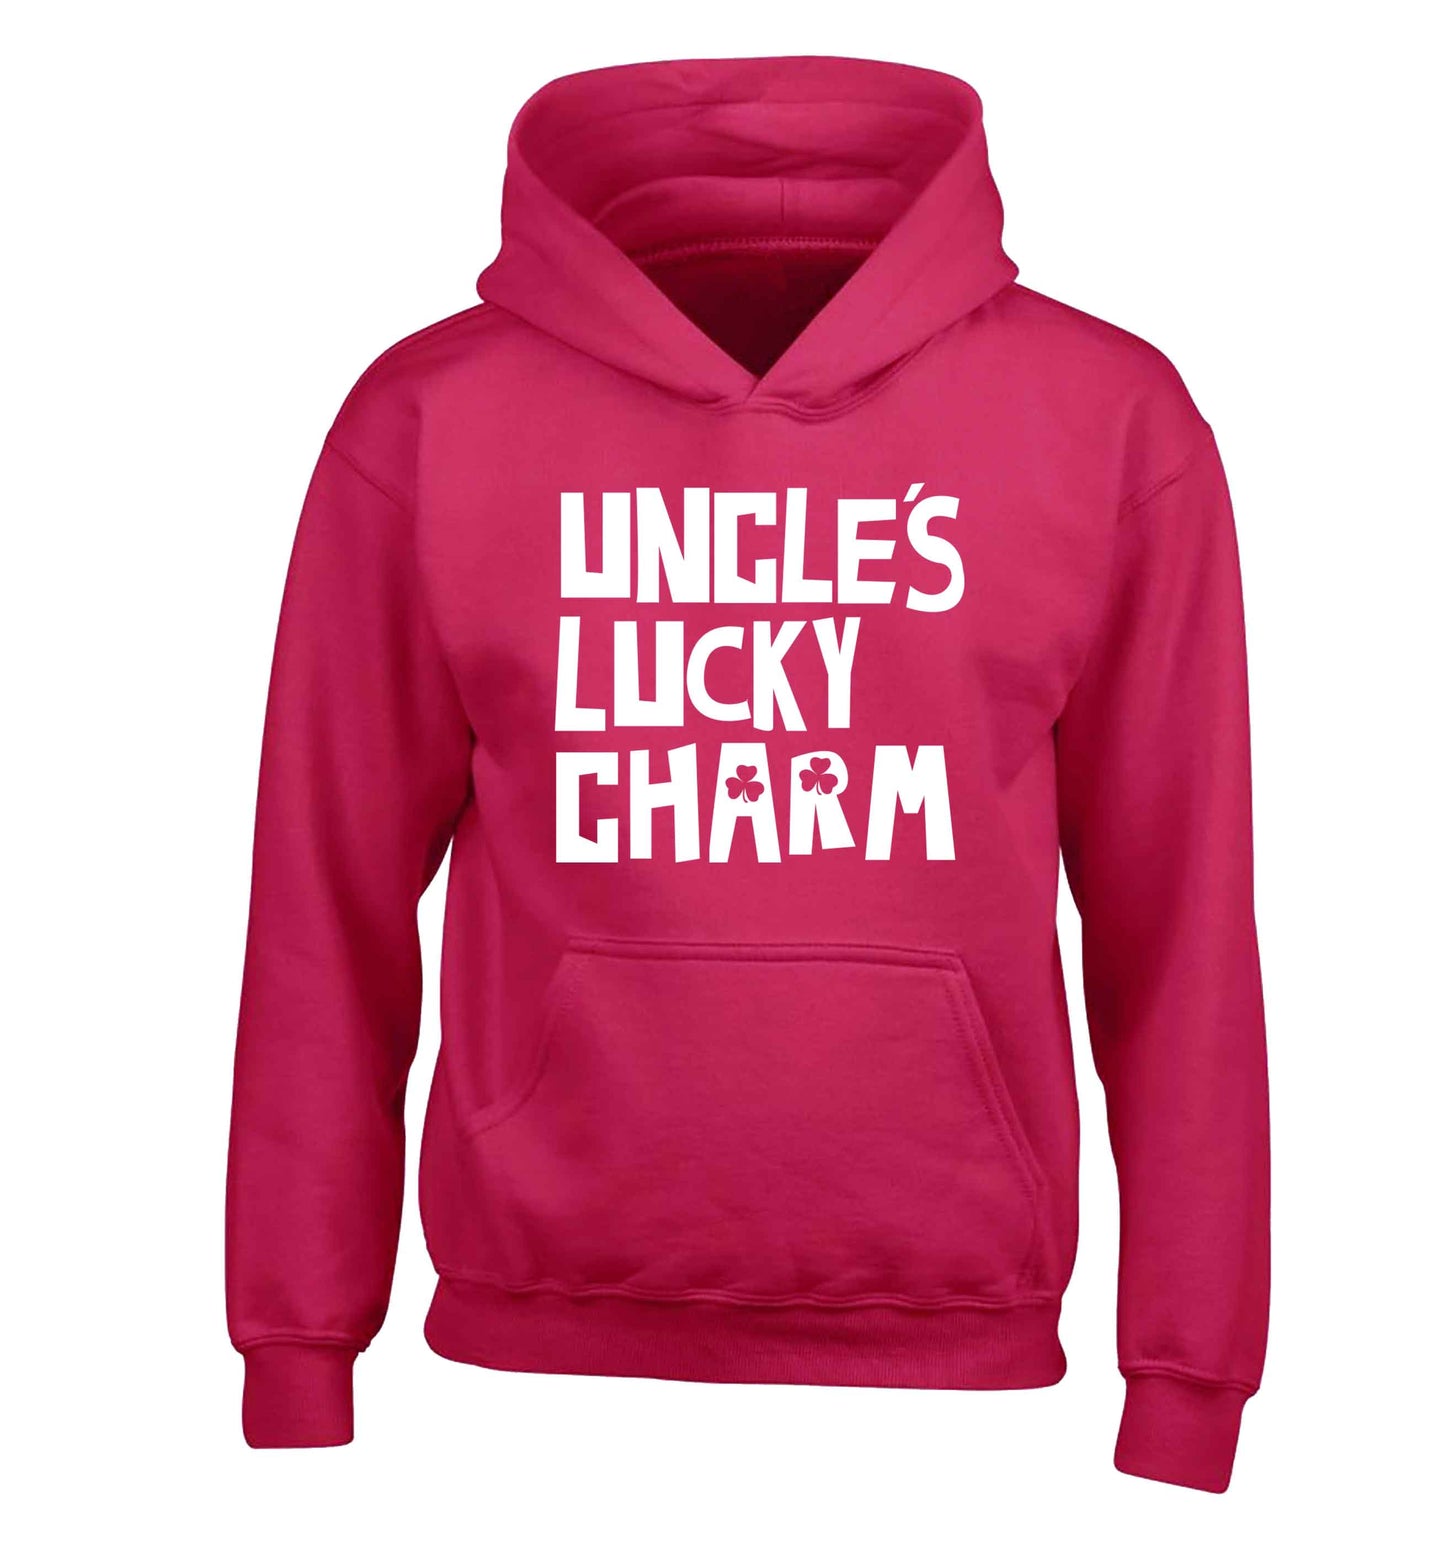 Uncles lucky charm children's pink hoodie 12-13 Years